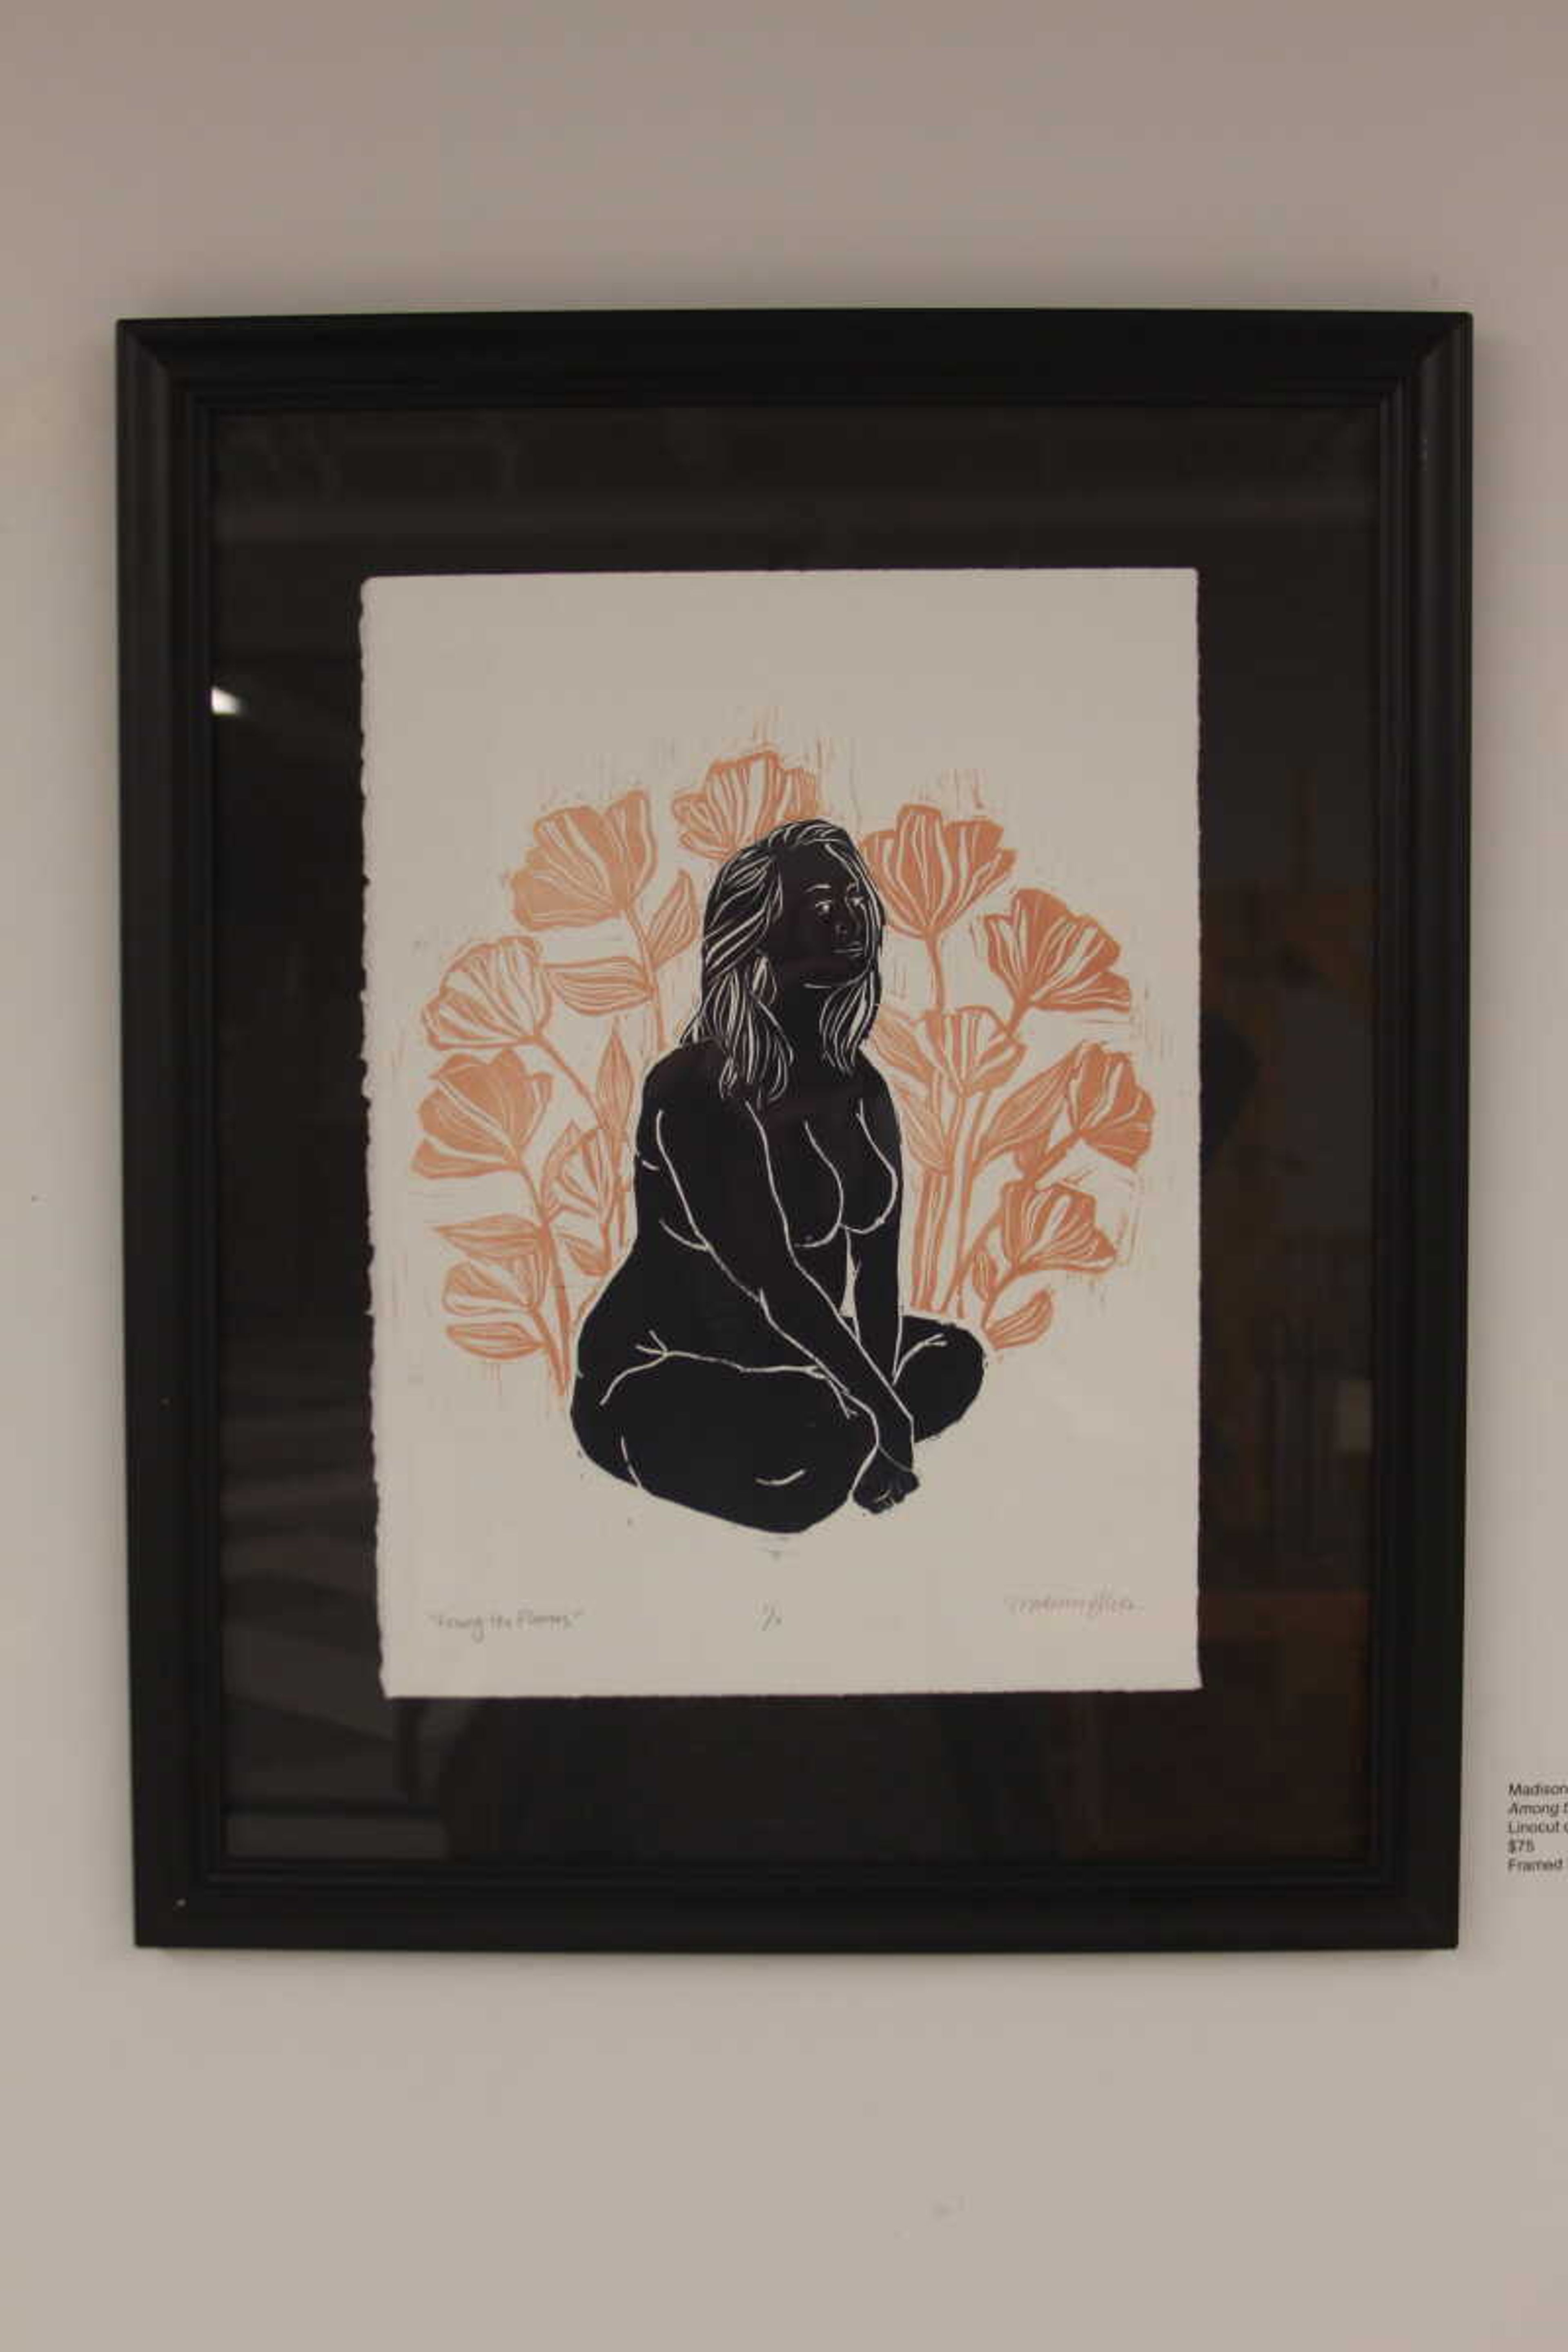 "Among the Flowers" by Madison Ellers at The Catapult Creative.